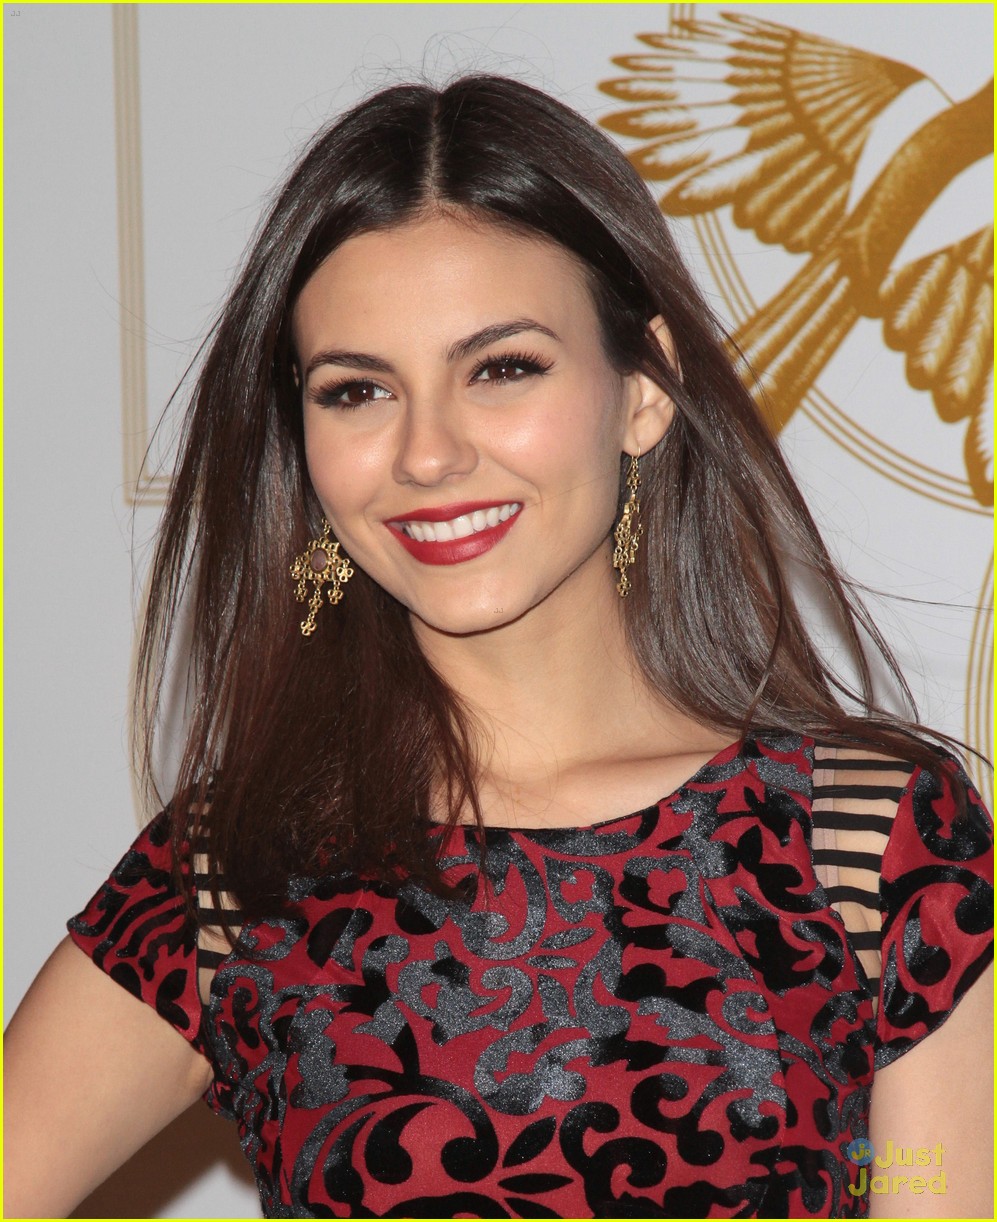 Victoria Justice Celebrates Fred Leighton with LoveGold | Photo 540040 ...